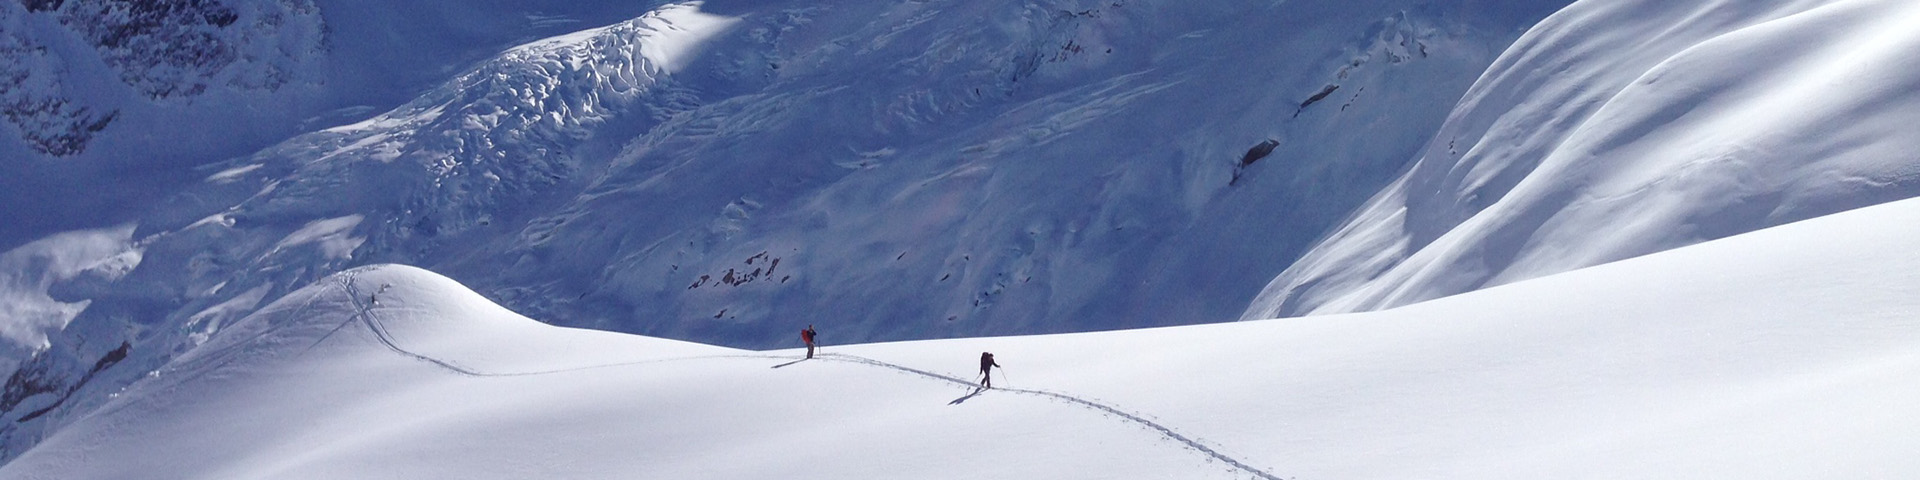 Two Skiers touring in snowy conditions